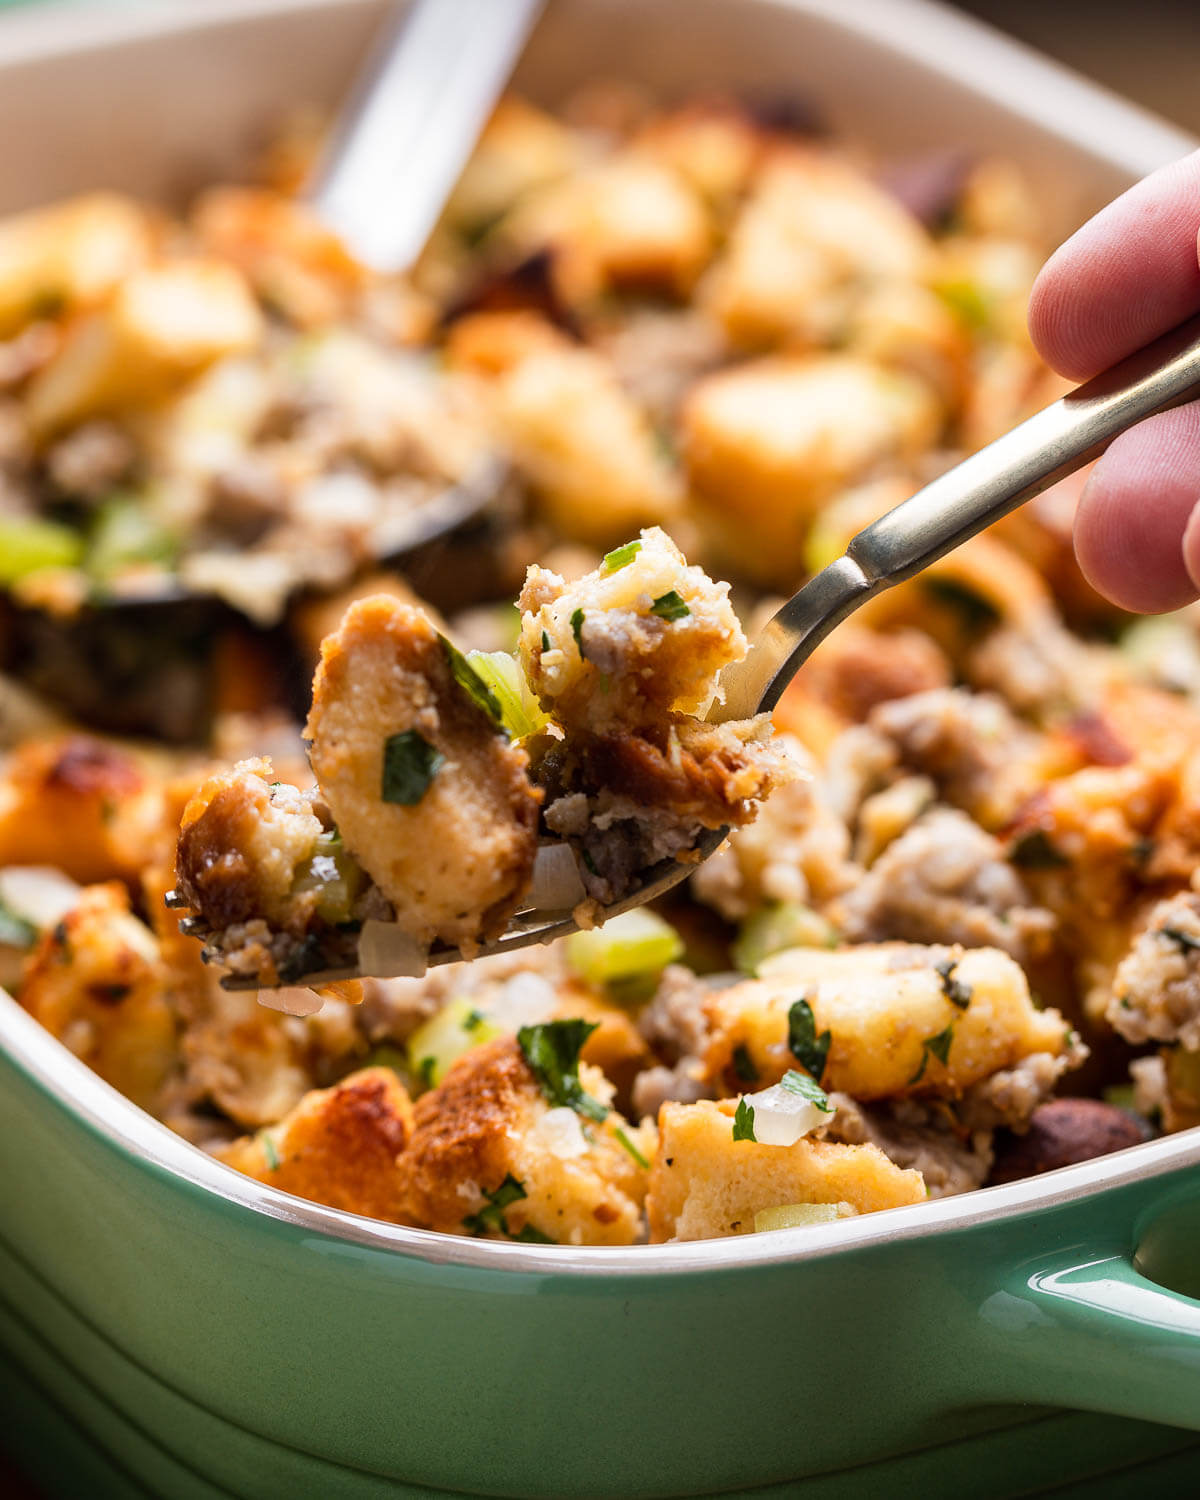 Hand holding fork with Italian sausage stuffing.